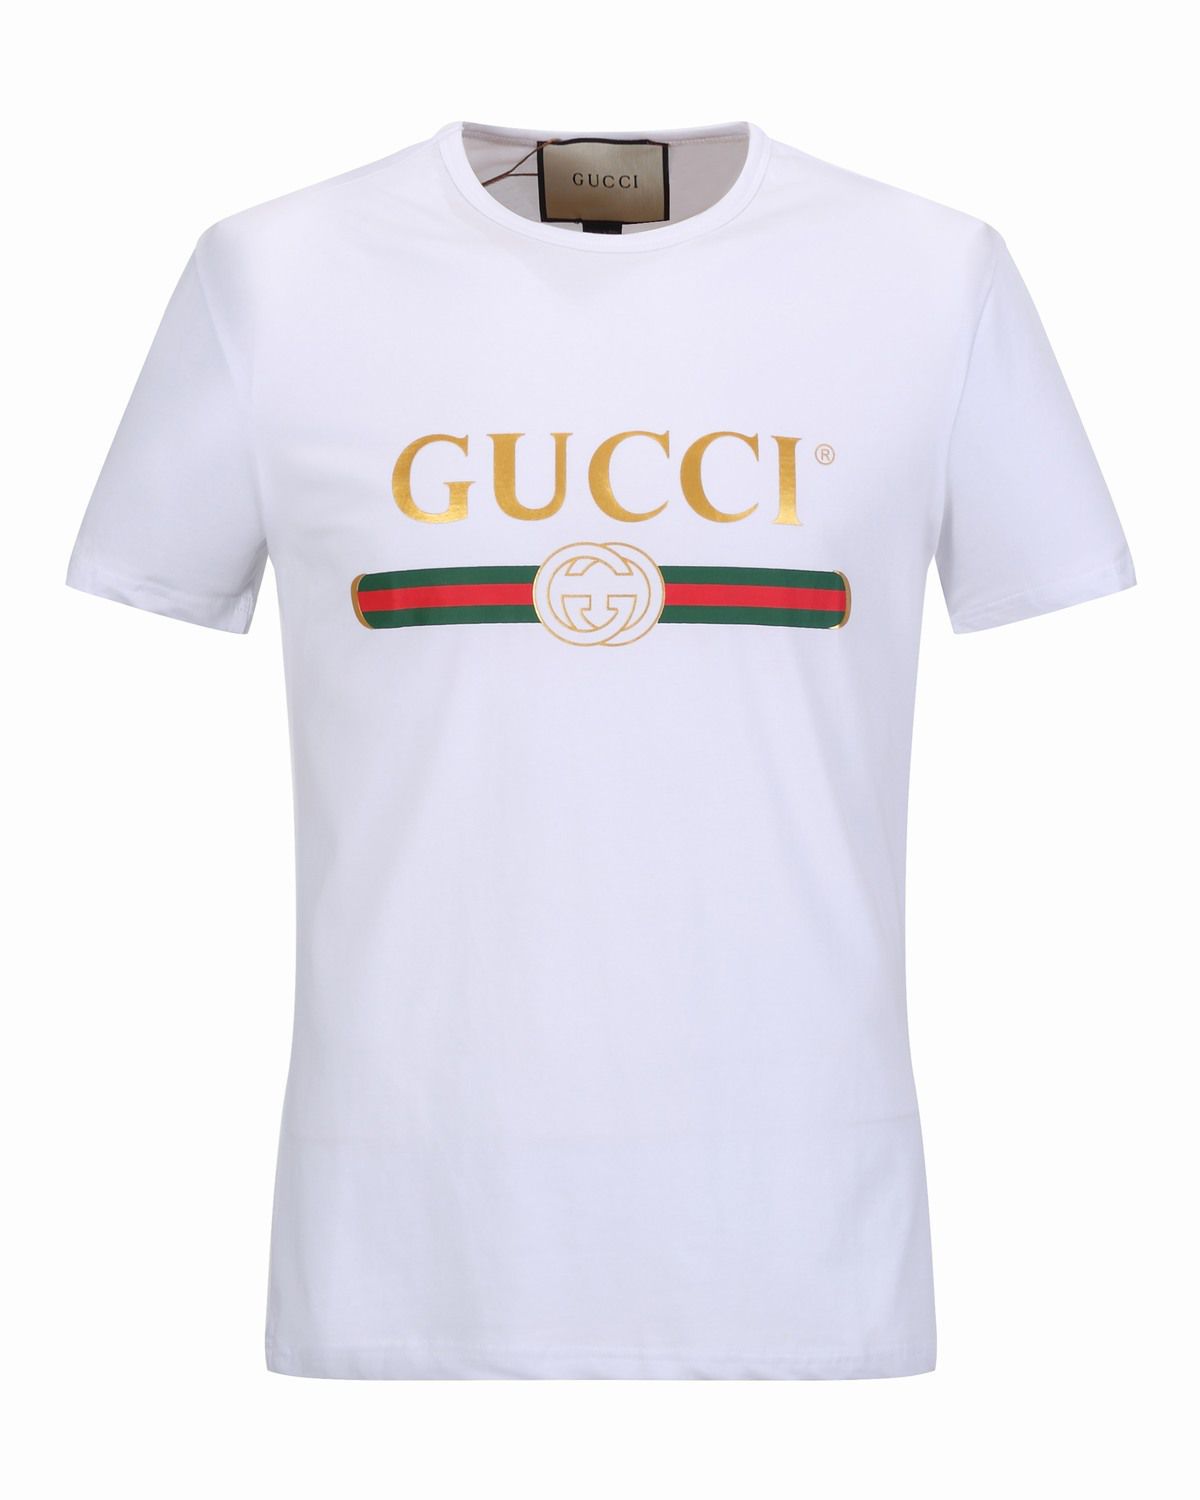 gucci shirts in india